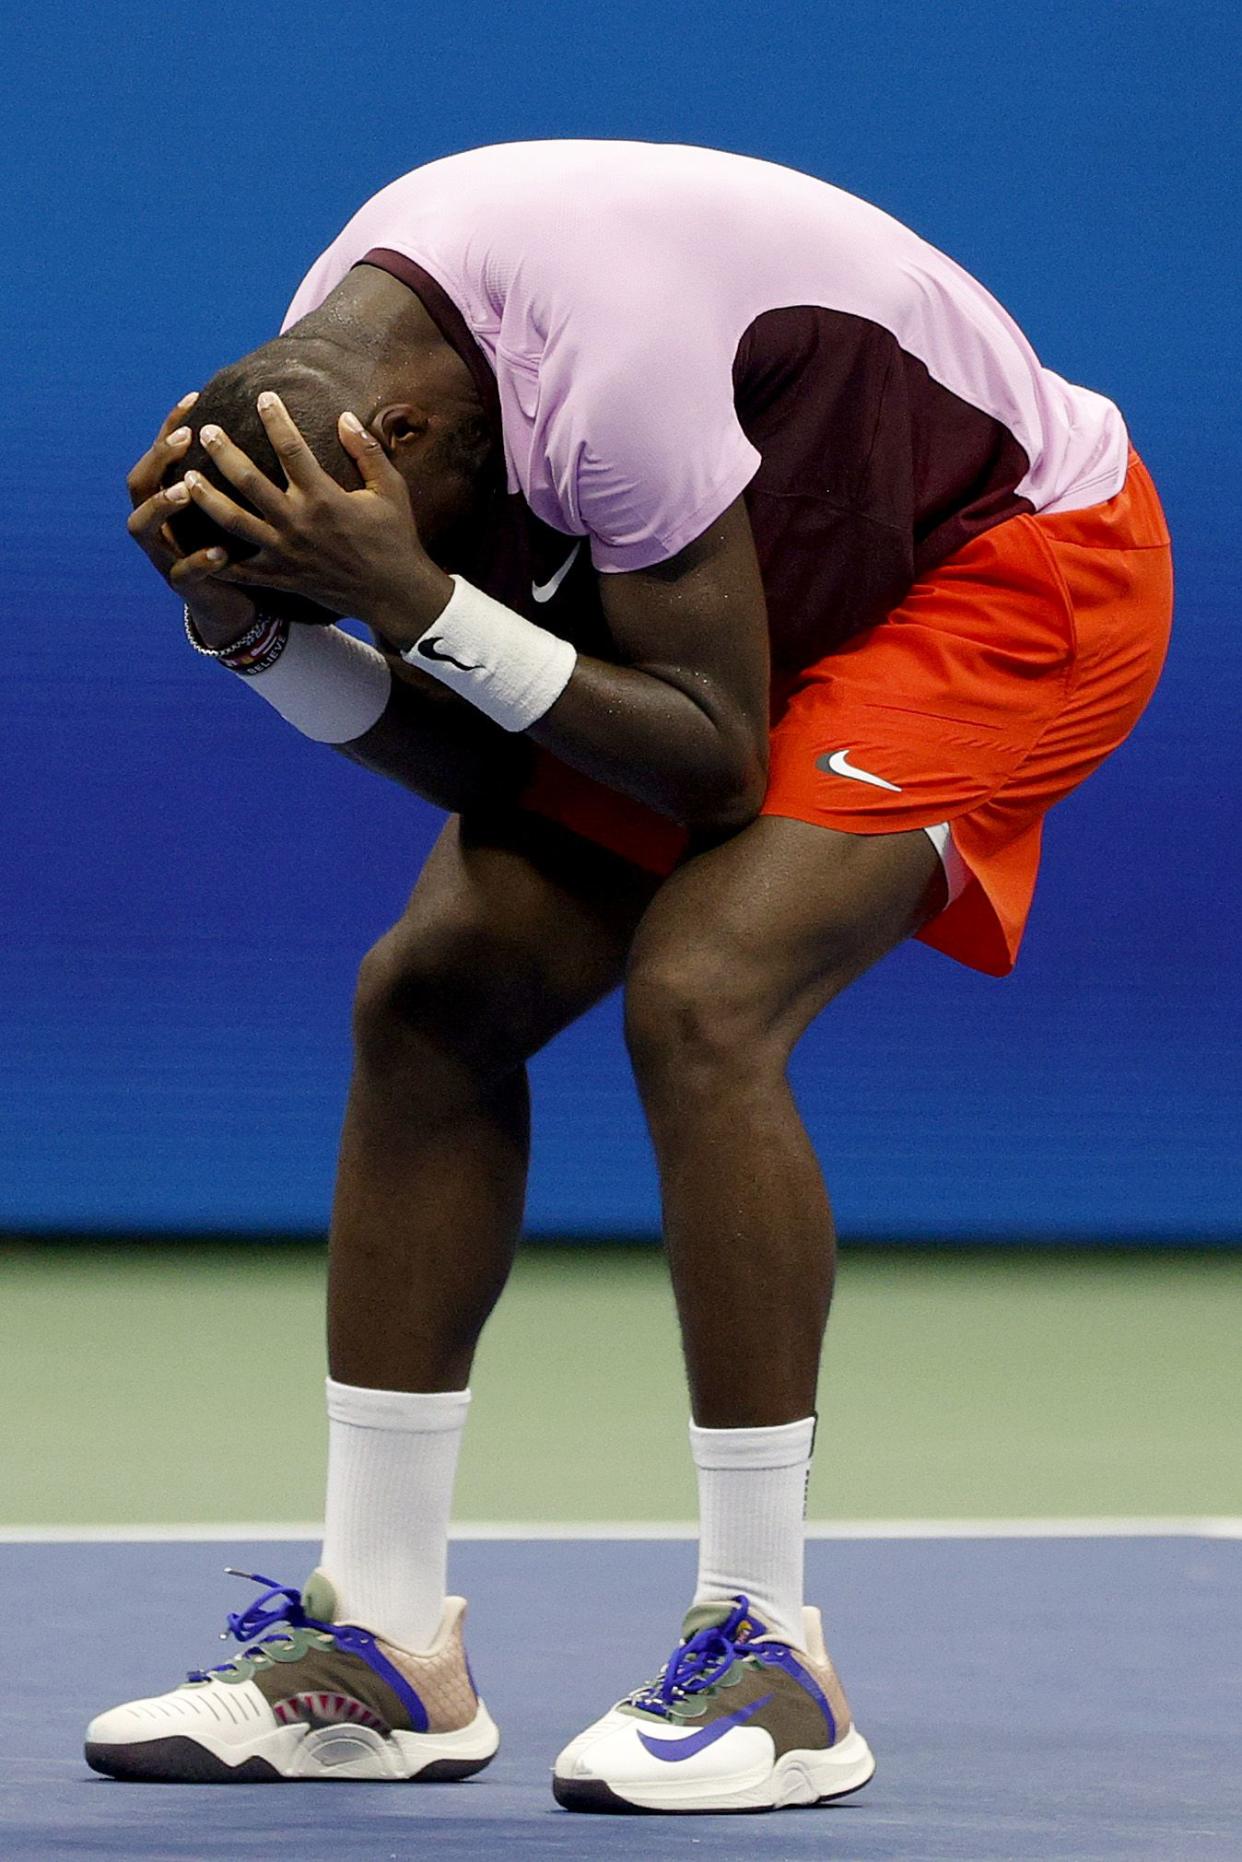 Frances Tiafoe of the United States reacts after defeating Rafael Nadal of Spain during their Men’s Singles Fourth Round match on Day Eight of the 2022 U.S. Open at USTA Billie Jean King National Tennis Center on Sept. 5, 2022, in Flushing, Queens.